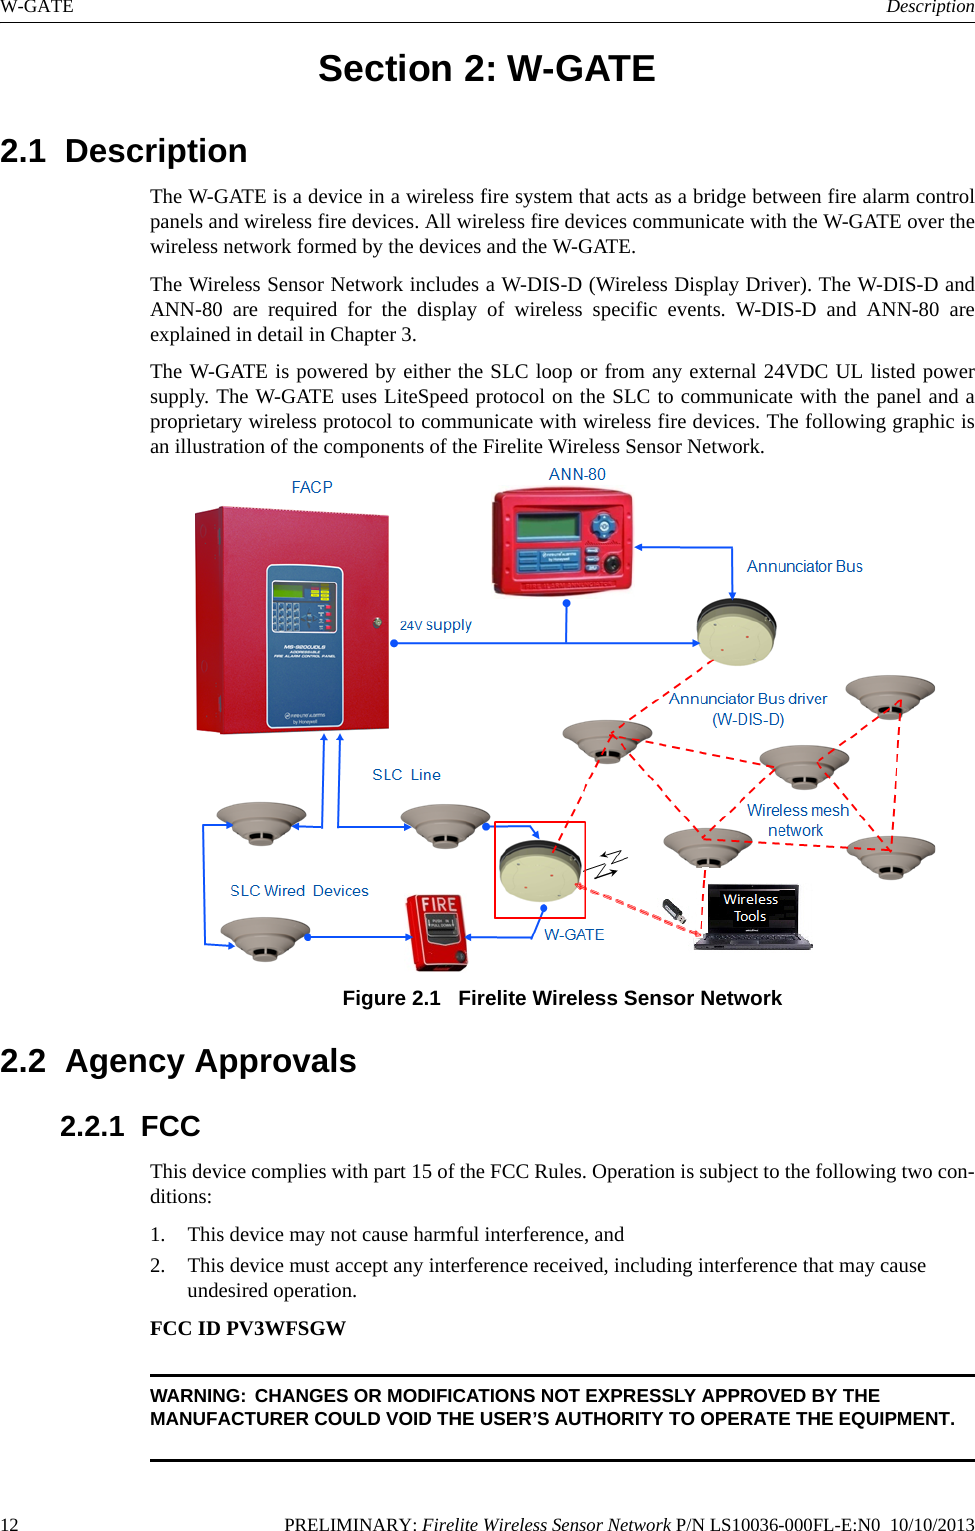 12 PRELIMINARY: Firelite Wireless Sensor Network P/N LS10036-000FL-E:N0  10/10/2013W-GATE DescriptionSection 2: W-GATE2.1  DescriptionThe W-GATE is a device in a wireless fire system that acts as a bridge between fire alarm controlpanels and wireless fire devices. All wireless fire devices communicate with the W-GATE over thewireless network formed by the devices and the W-GATE. The Wireless Sensor Network includes a W-DIS-D (Wireless Display Driver). The W-DIS-D andANN-80 are required for the display of wireless specific events. W-DIS-D and ANN-80 areexplained in detail in Chapter 3.The W-GATE is powered by either the SLC loop or from any external 24VDC UL listed powersupply. The W-GATE uses LiteSpeed protocol on the SLC to communicate with the panel and aproprietary wireless protocol to communicate with wireless fire devices. The following graphic isan illustration of the components of the Firelite Wireless Sensor Network.Figure 2.1   Firelite Wireless Sensor Network 2.2  Agency Approvals2.2.1  FCCThis device complies with part 15 of the FCC Rules. Operation is subject to the following two con-ditions: 1. This device may not cause harmful interference, and 2. This device must accept any interference received, including interference that may cause undesired operation.FCC ID PV3WFSGWWARNING: CHANGES OR MODIFICATIONS NOT EXPRESSLY APPROVED BY THE MANUFACTURER COULD VOID THE USER’S AUTHORITY TO OPERATE THE EQUIPMENT.